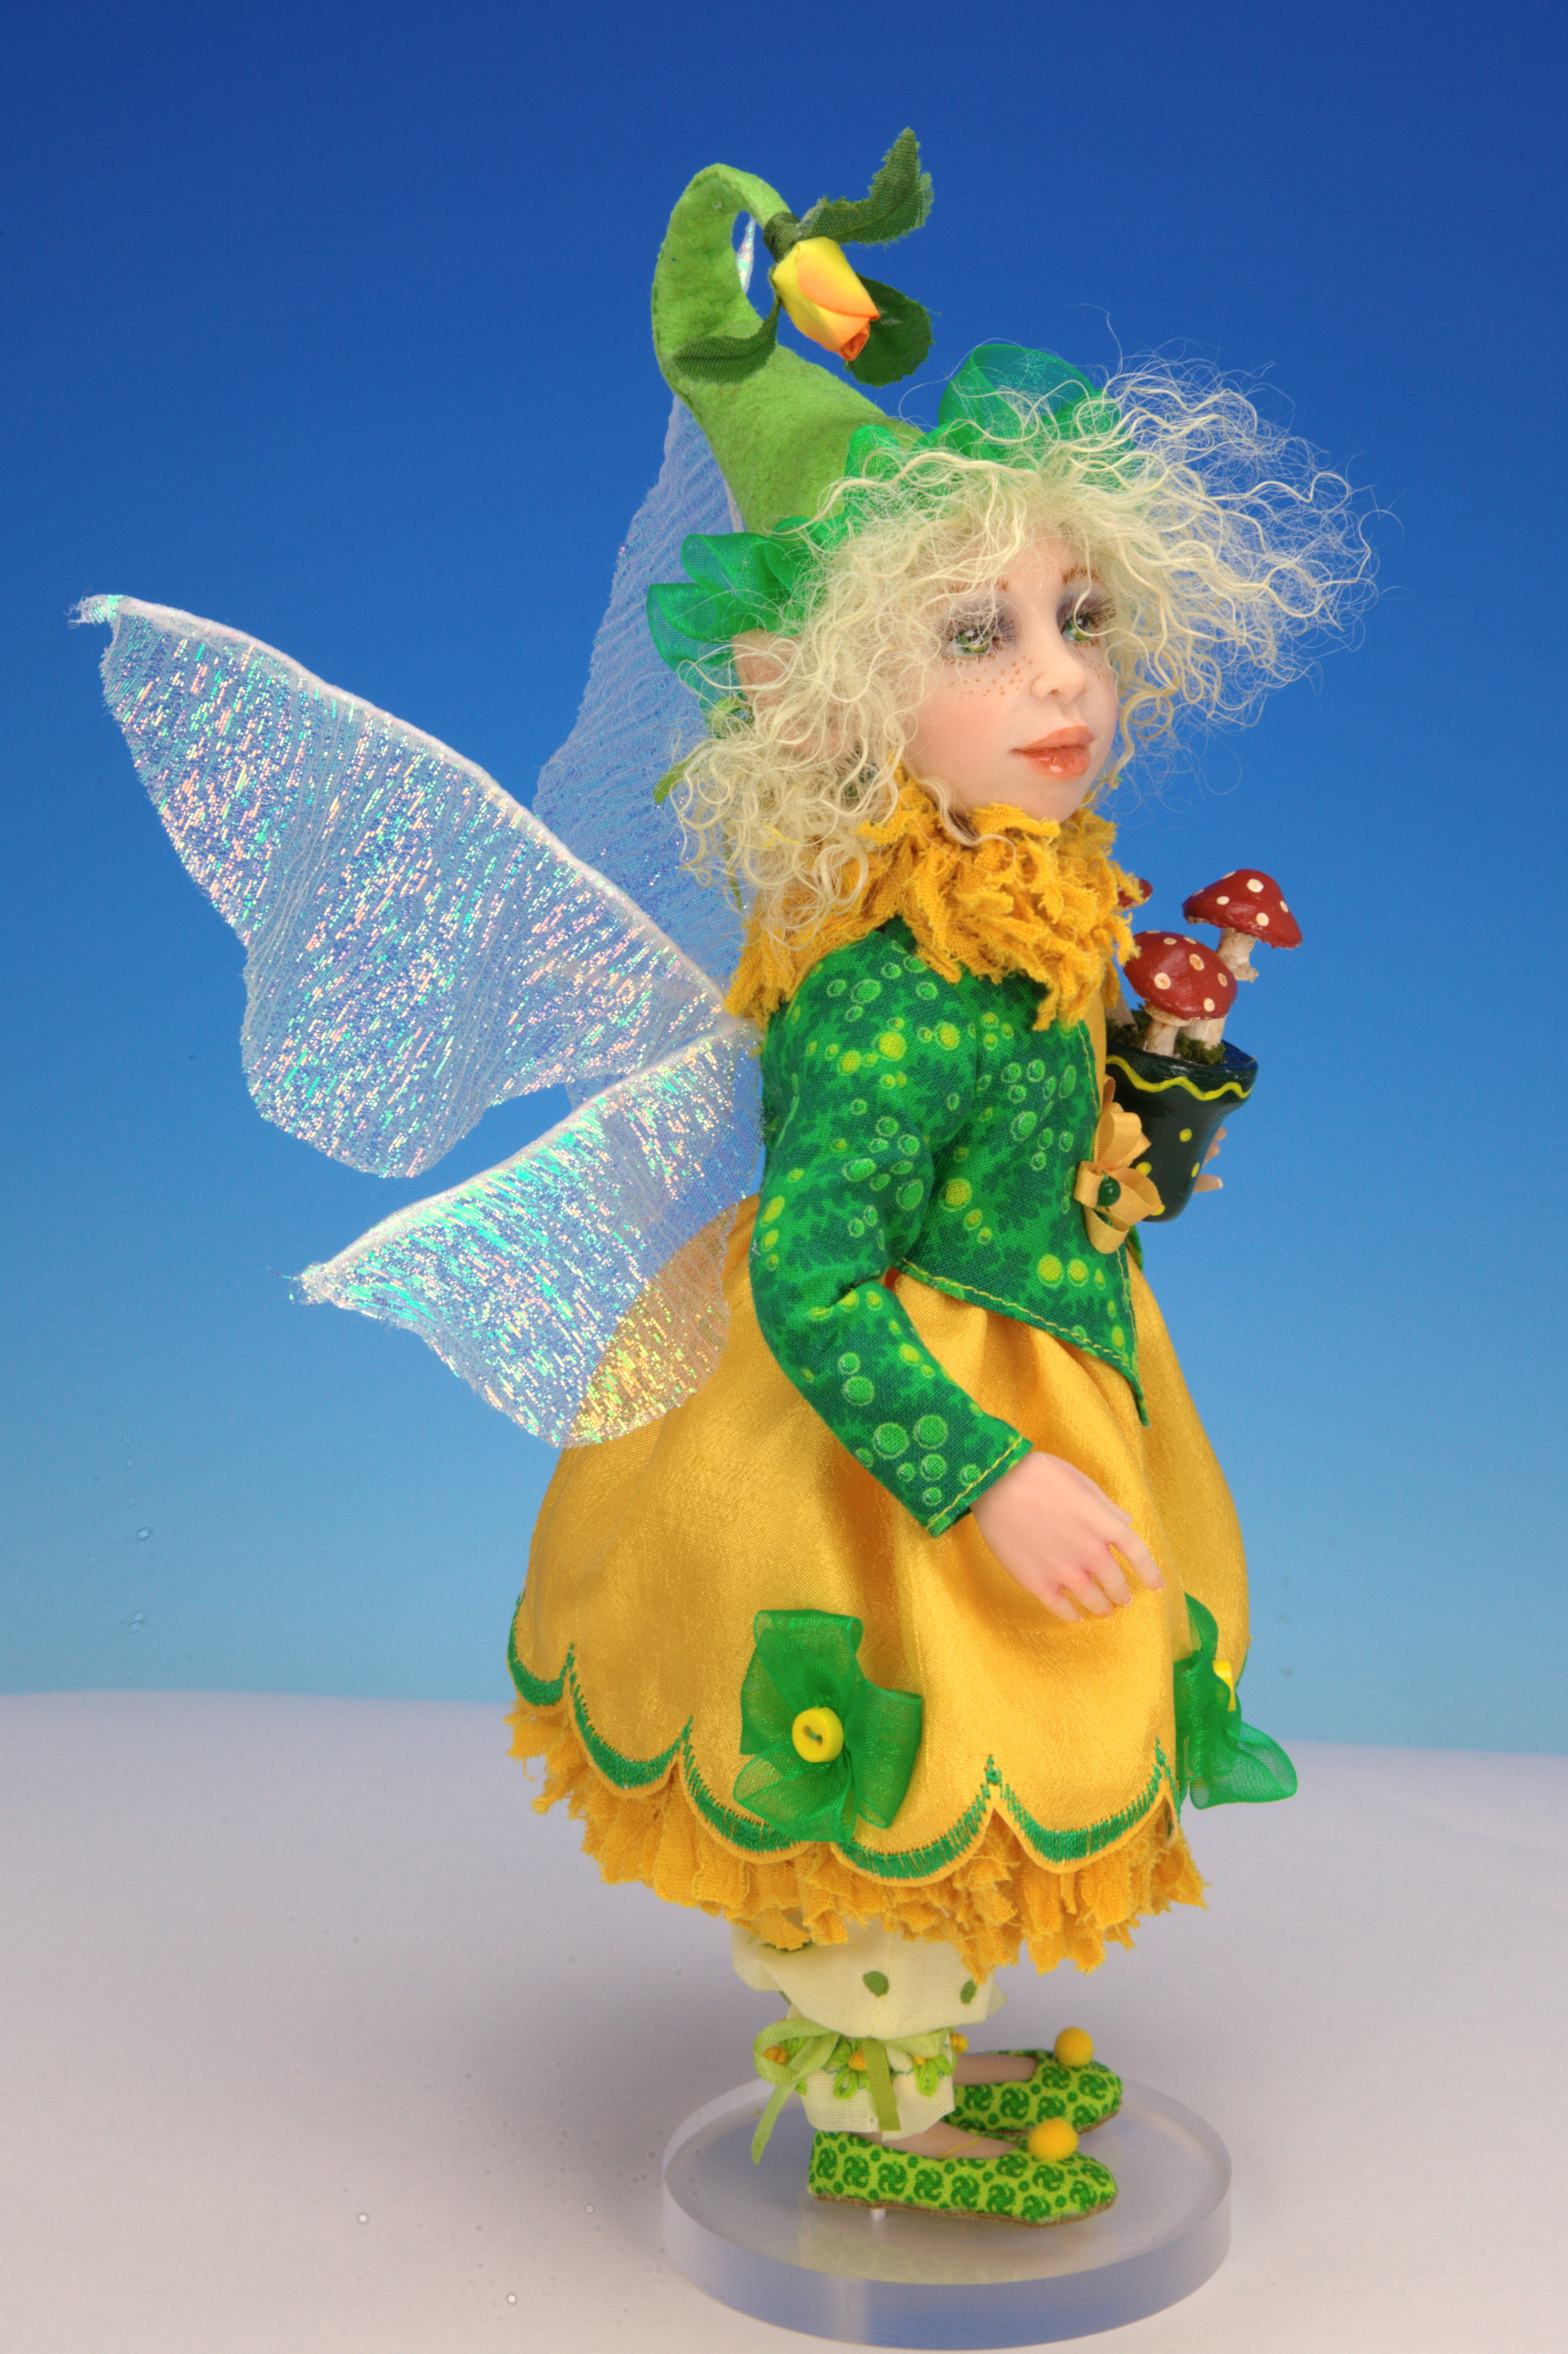 Dandelion - One-Of-A-Kind Doll by Tanya Abaimova. Creatures Gallery 